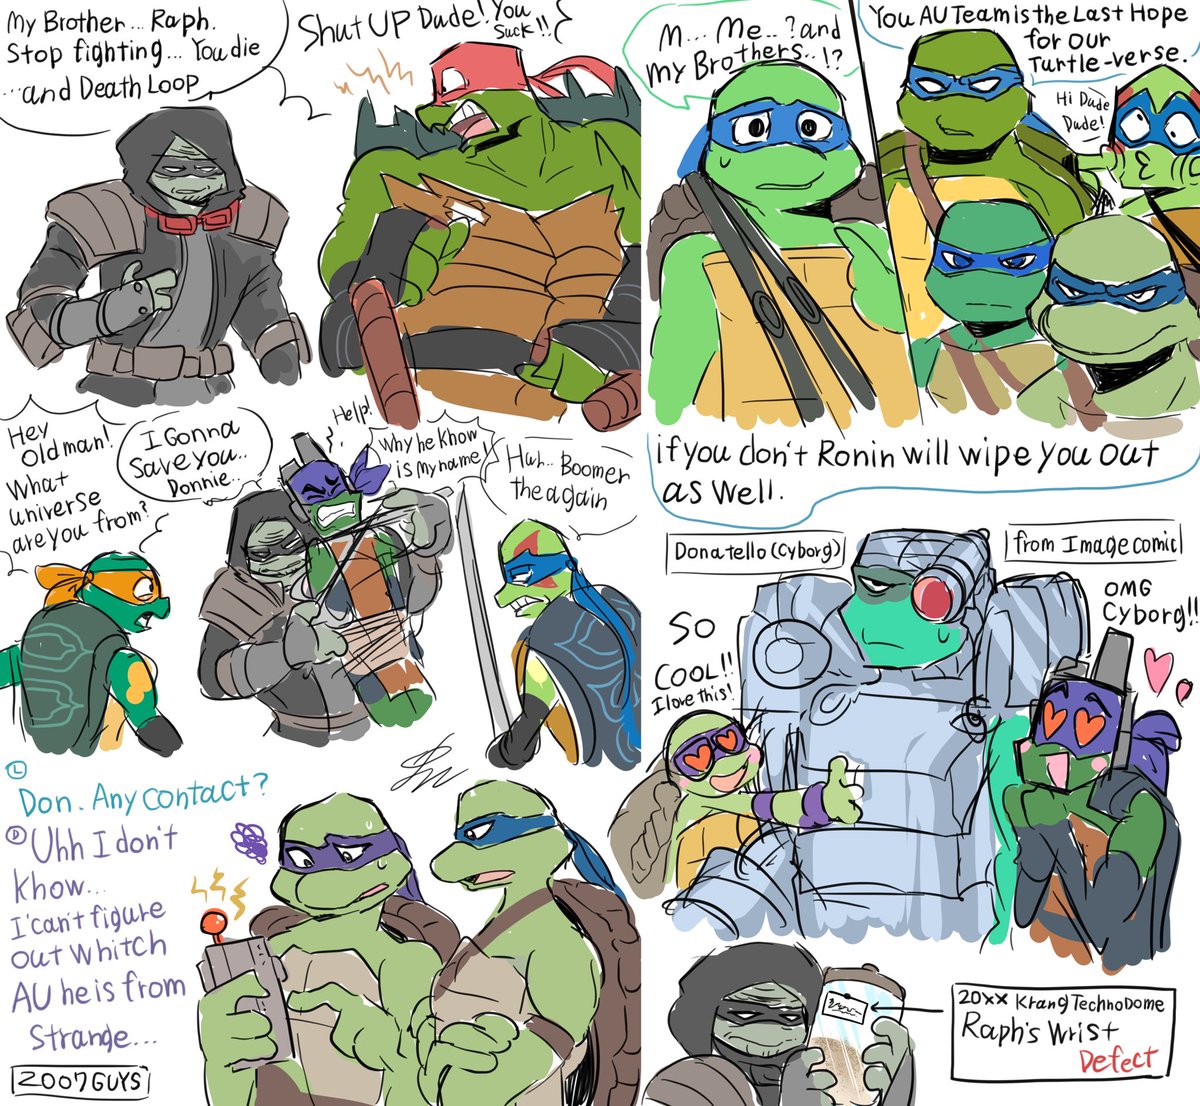 #tmnt verse(my fiction) doodles  Last Ronin wants to save his brothers. Even if that idea is distorted. .... Once again, I think IMAGE COMICS Donatello is my favorite.